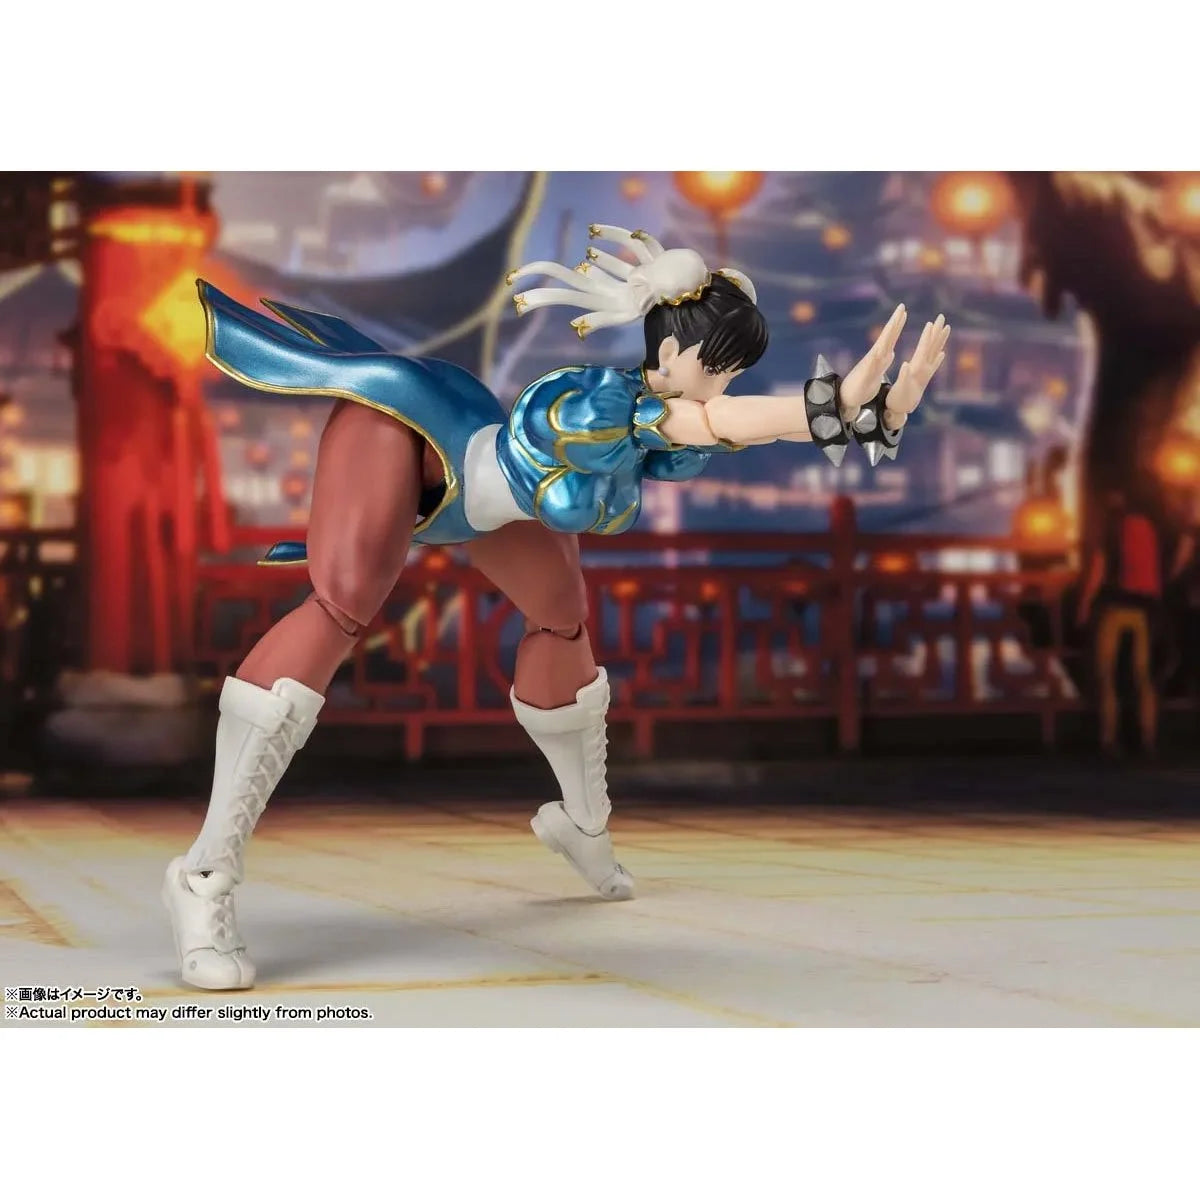 Street Fighter - Chun-Li - Outfit 2 - S.H.Figuarts Action Figure